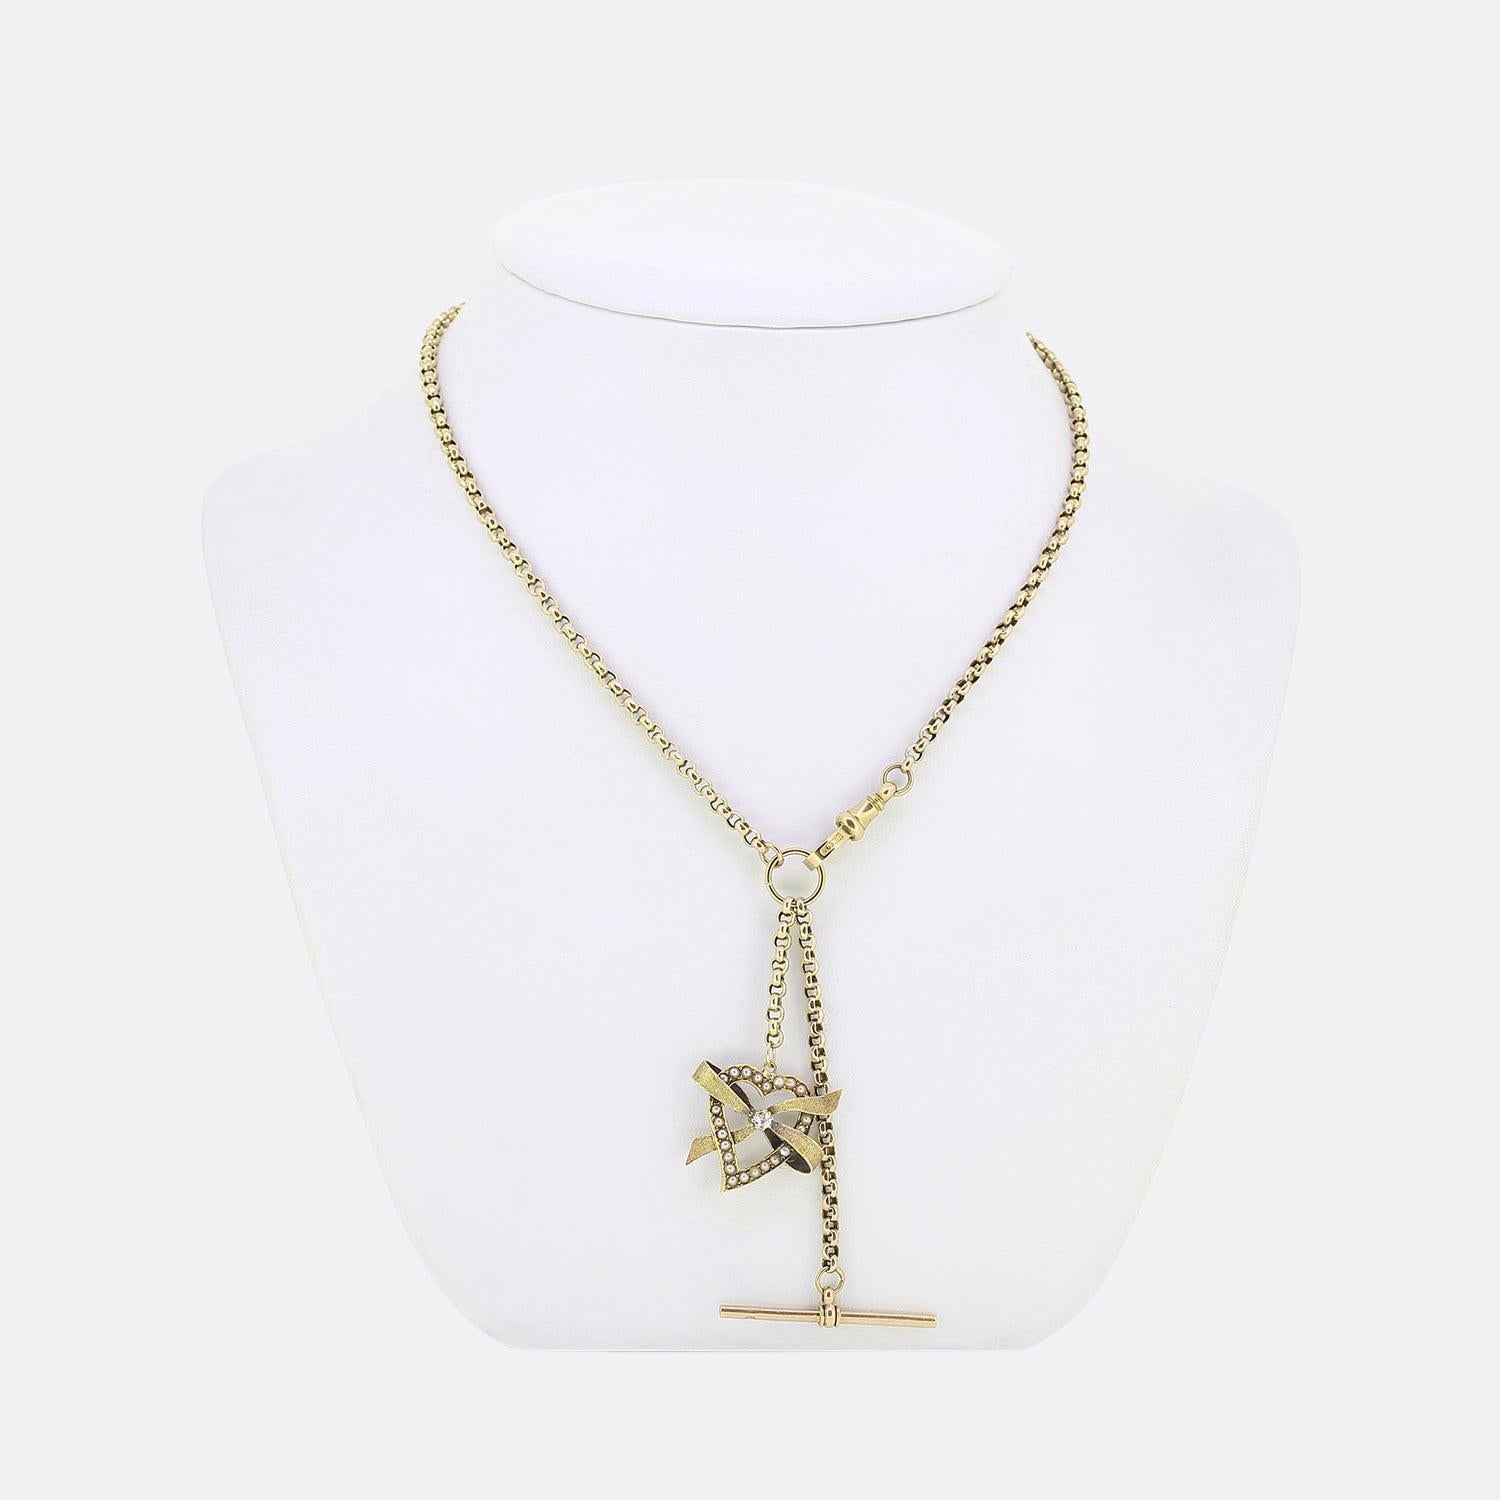 This is a vintage 9ct yellow gold belcher chain charm necklace. The necklace plays host to a duo of freely hanging motifs. Firstly, an open love heart pendant is framed by an array of natural seed pearls with a single round faceted diamond at the